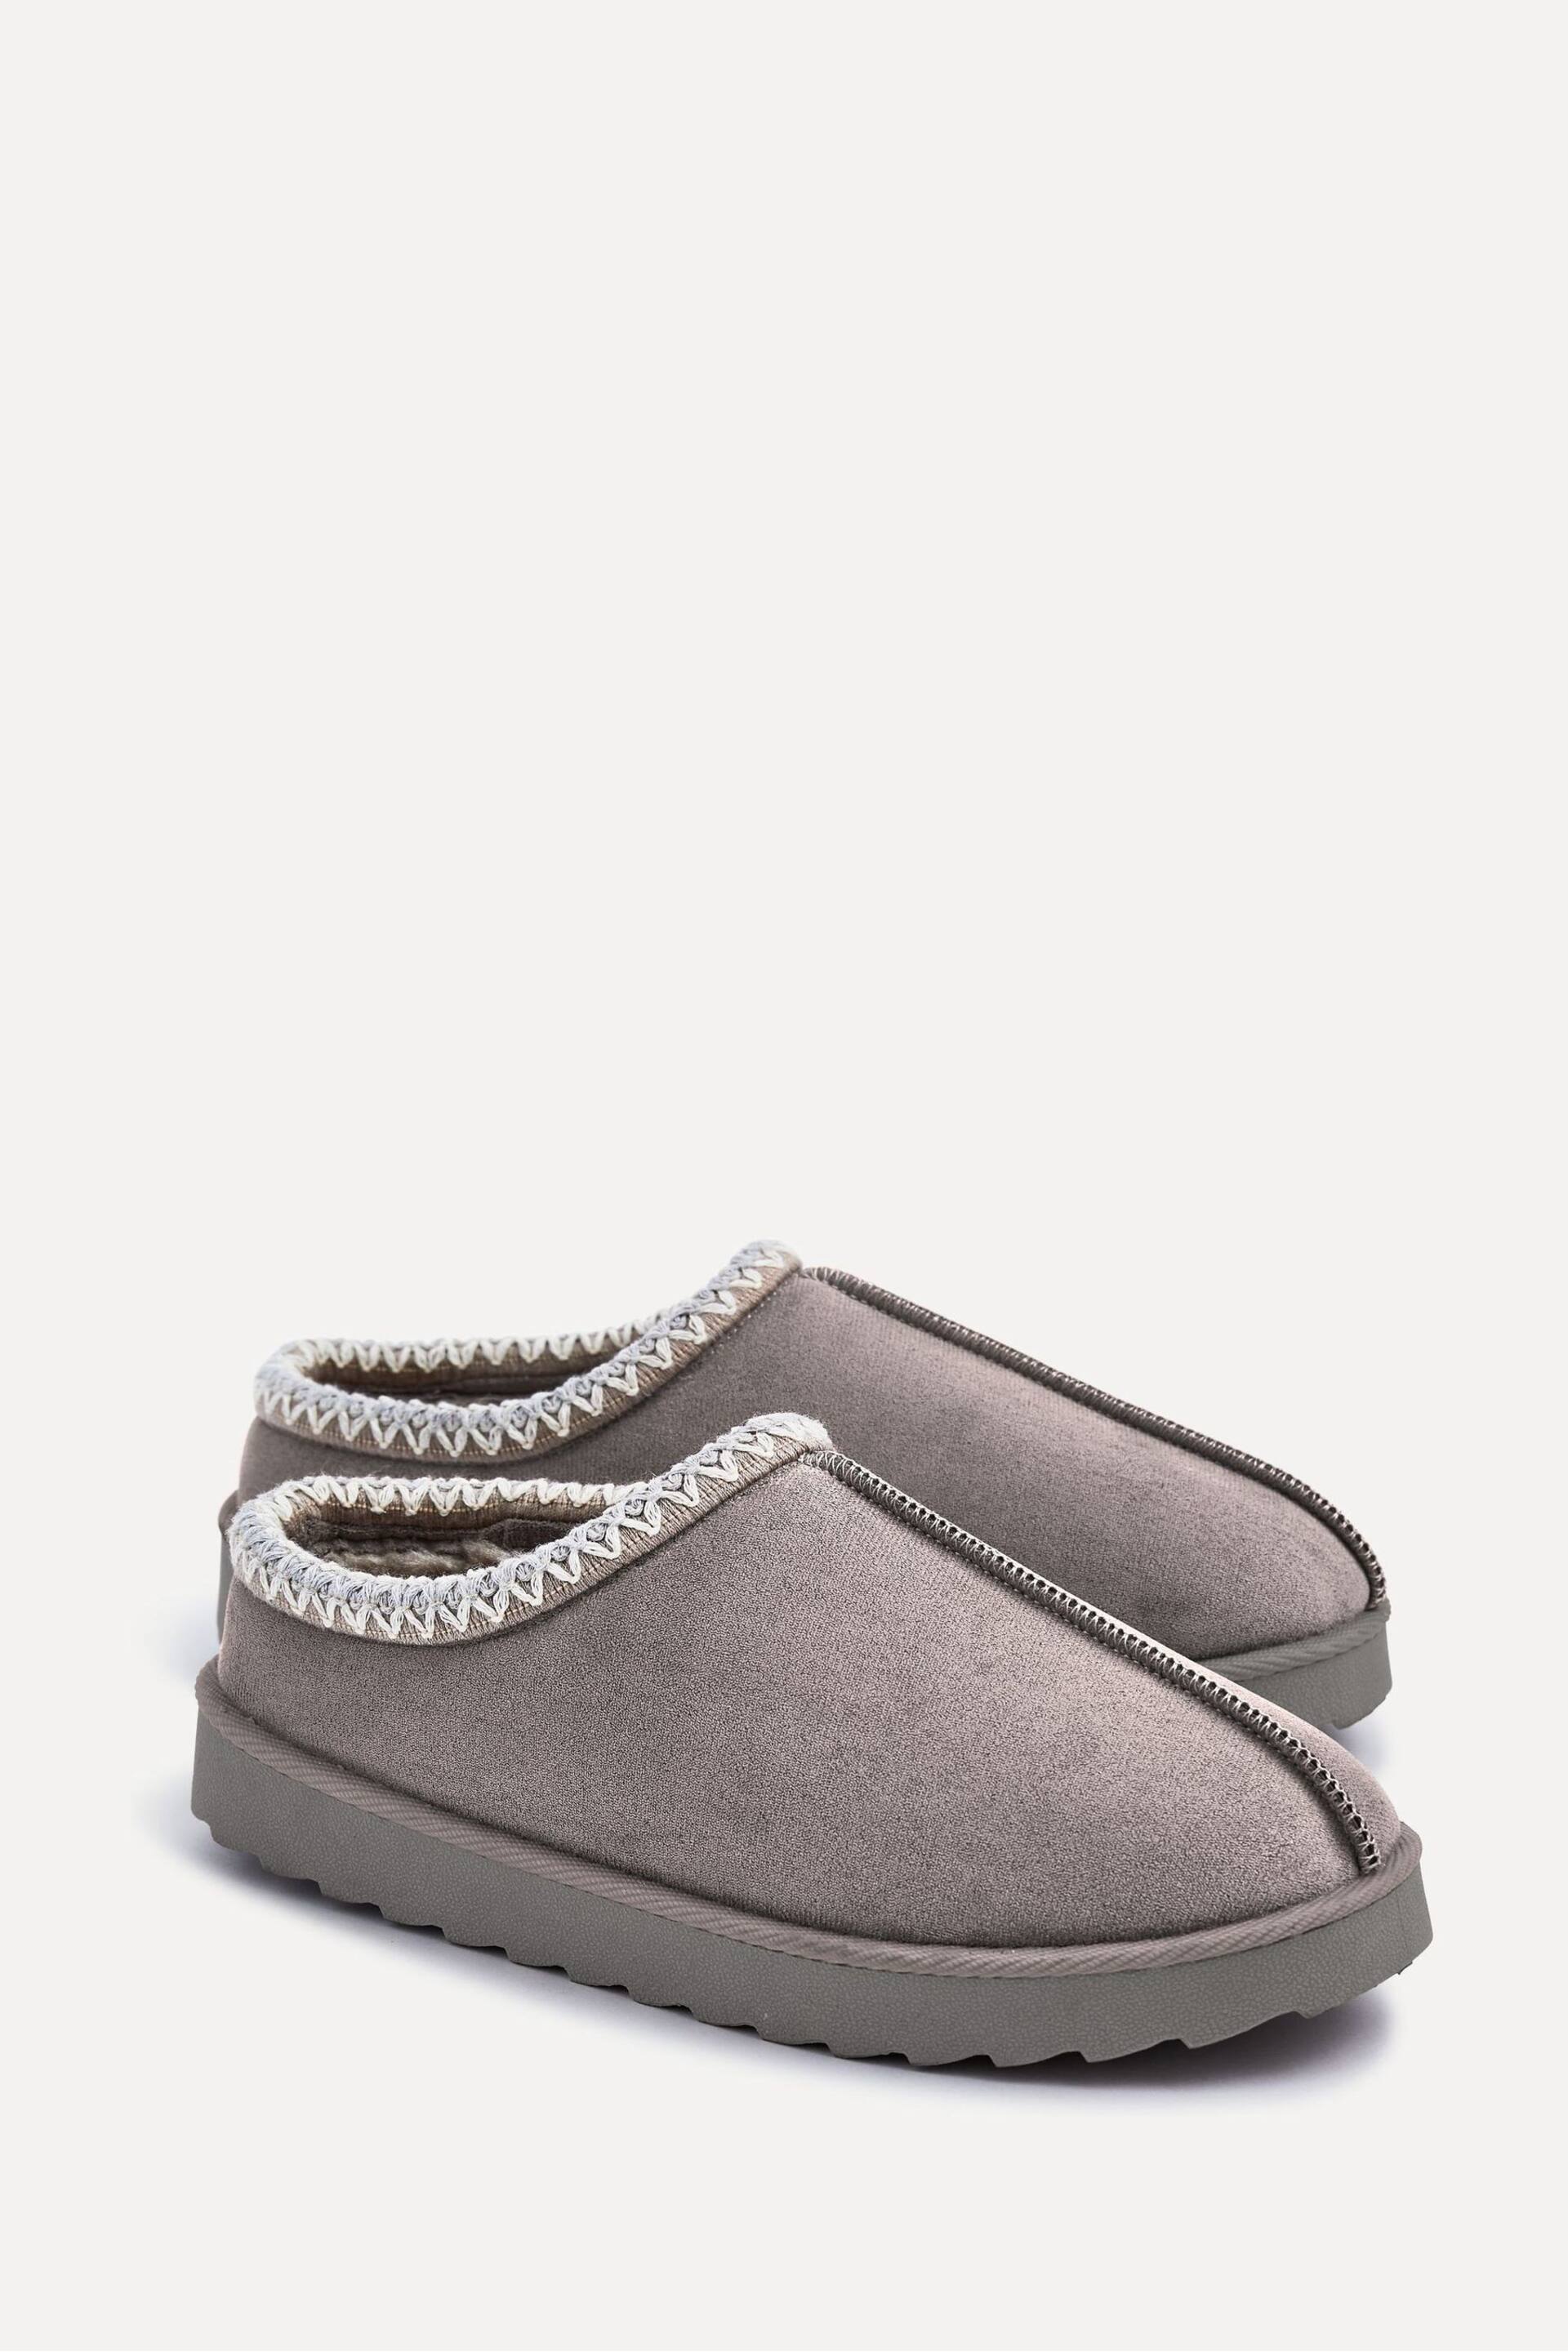 Linzi Grey Tana Faux Suede Slip-On Slippers With Aztec Detail - Image 3 of 5